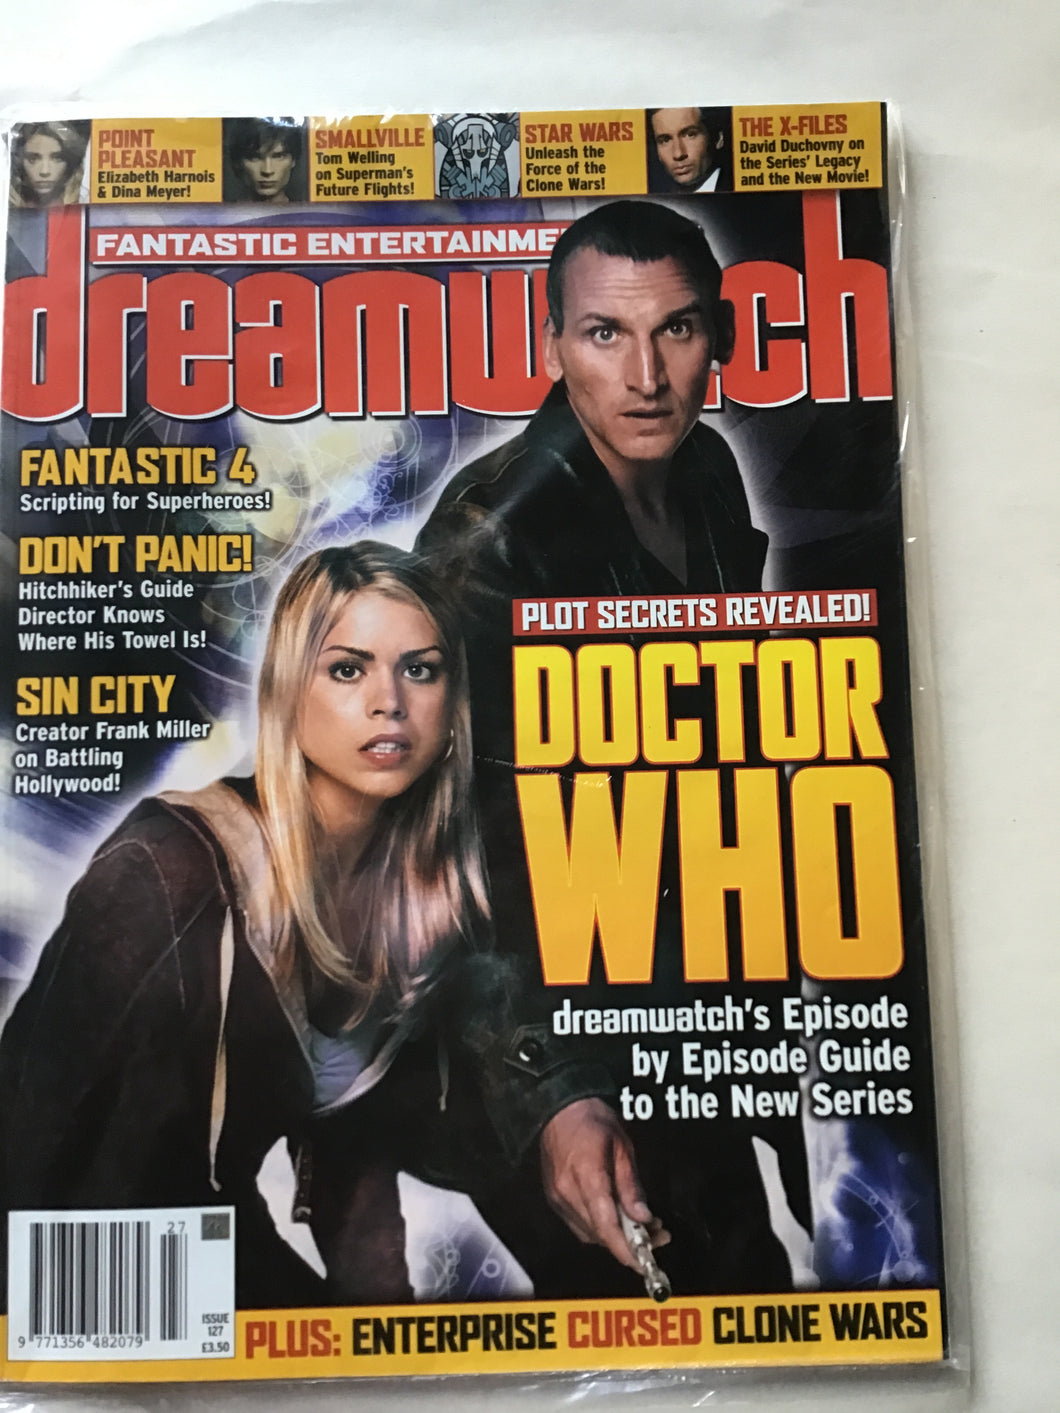 Dream watch magazine April 2005 issue 127 Sin City fantastic four Doctor Who Star Wars X-Files